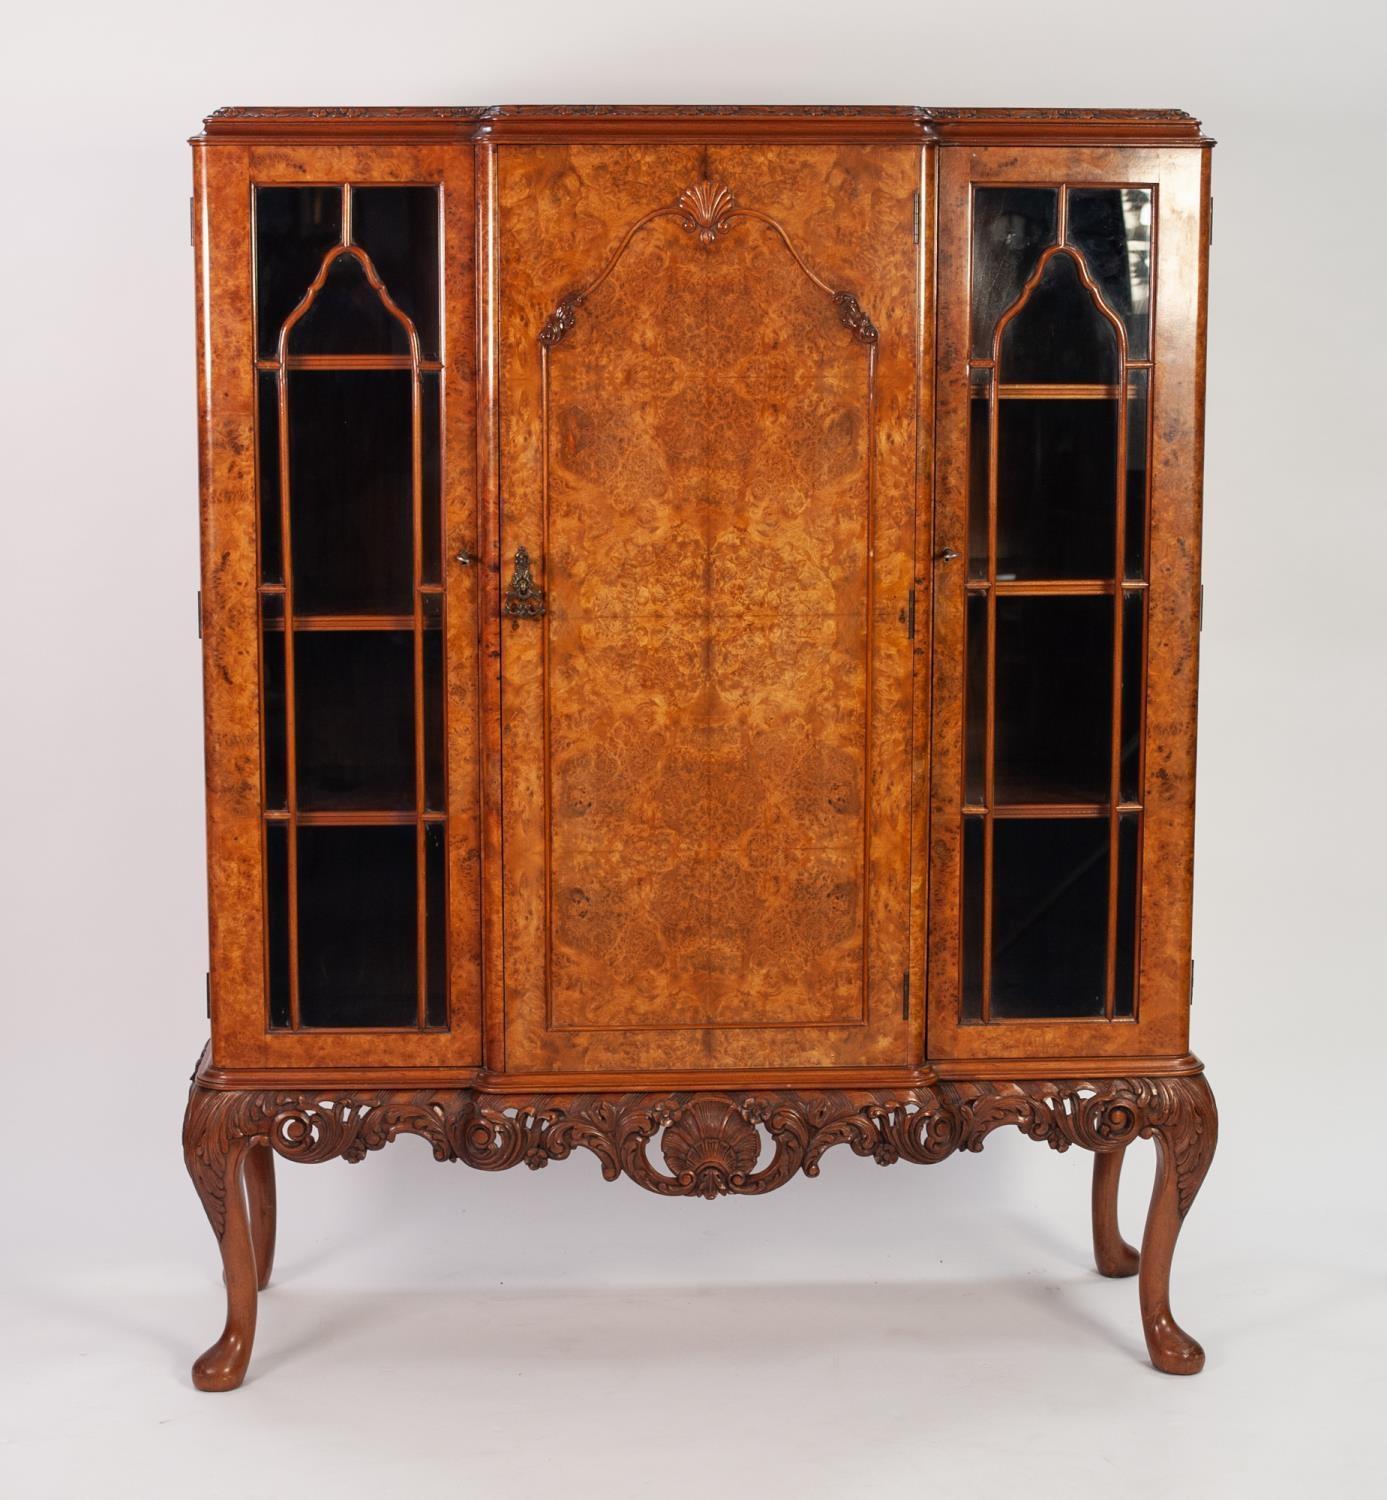 GOOD QUALITY MID TWENTIETH CENTURY CARVED AND FIGURED WALNUT DISPLAY CABINET IN THE QUEEN ANN TASTE,